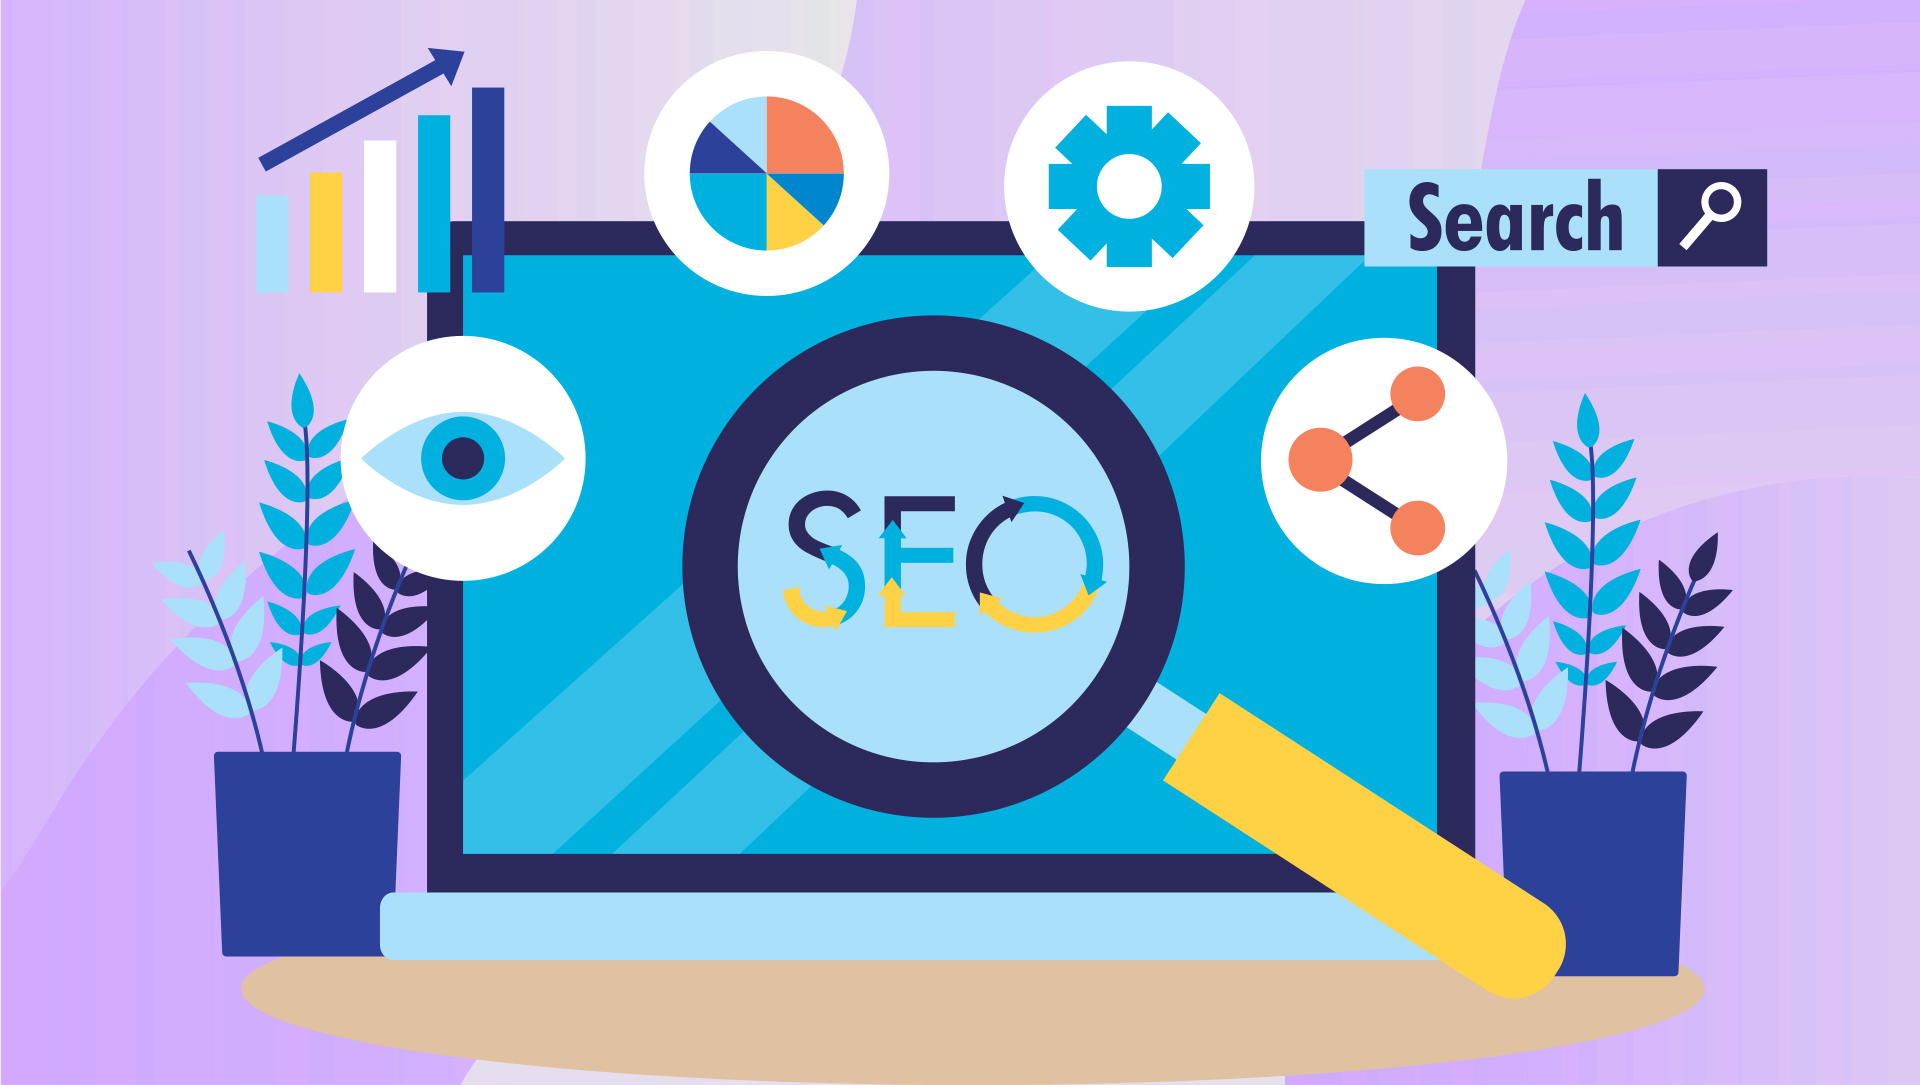 10-best-strategies-to-maximize-seo-roi-related-blog-33